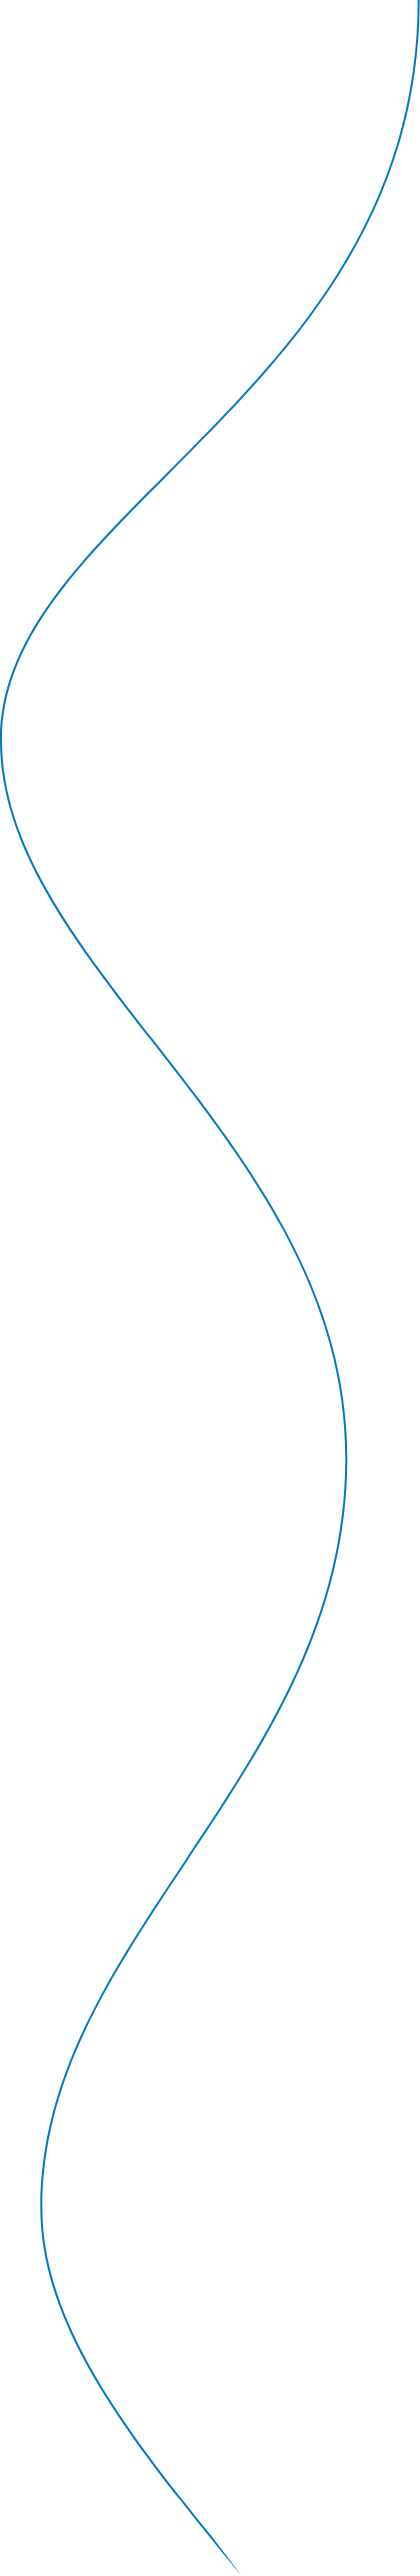 Blue curved line